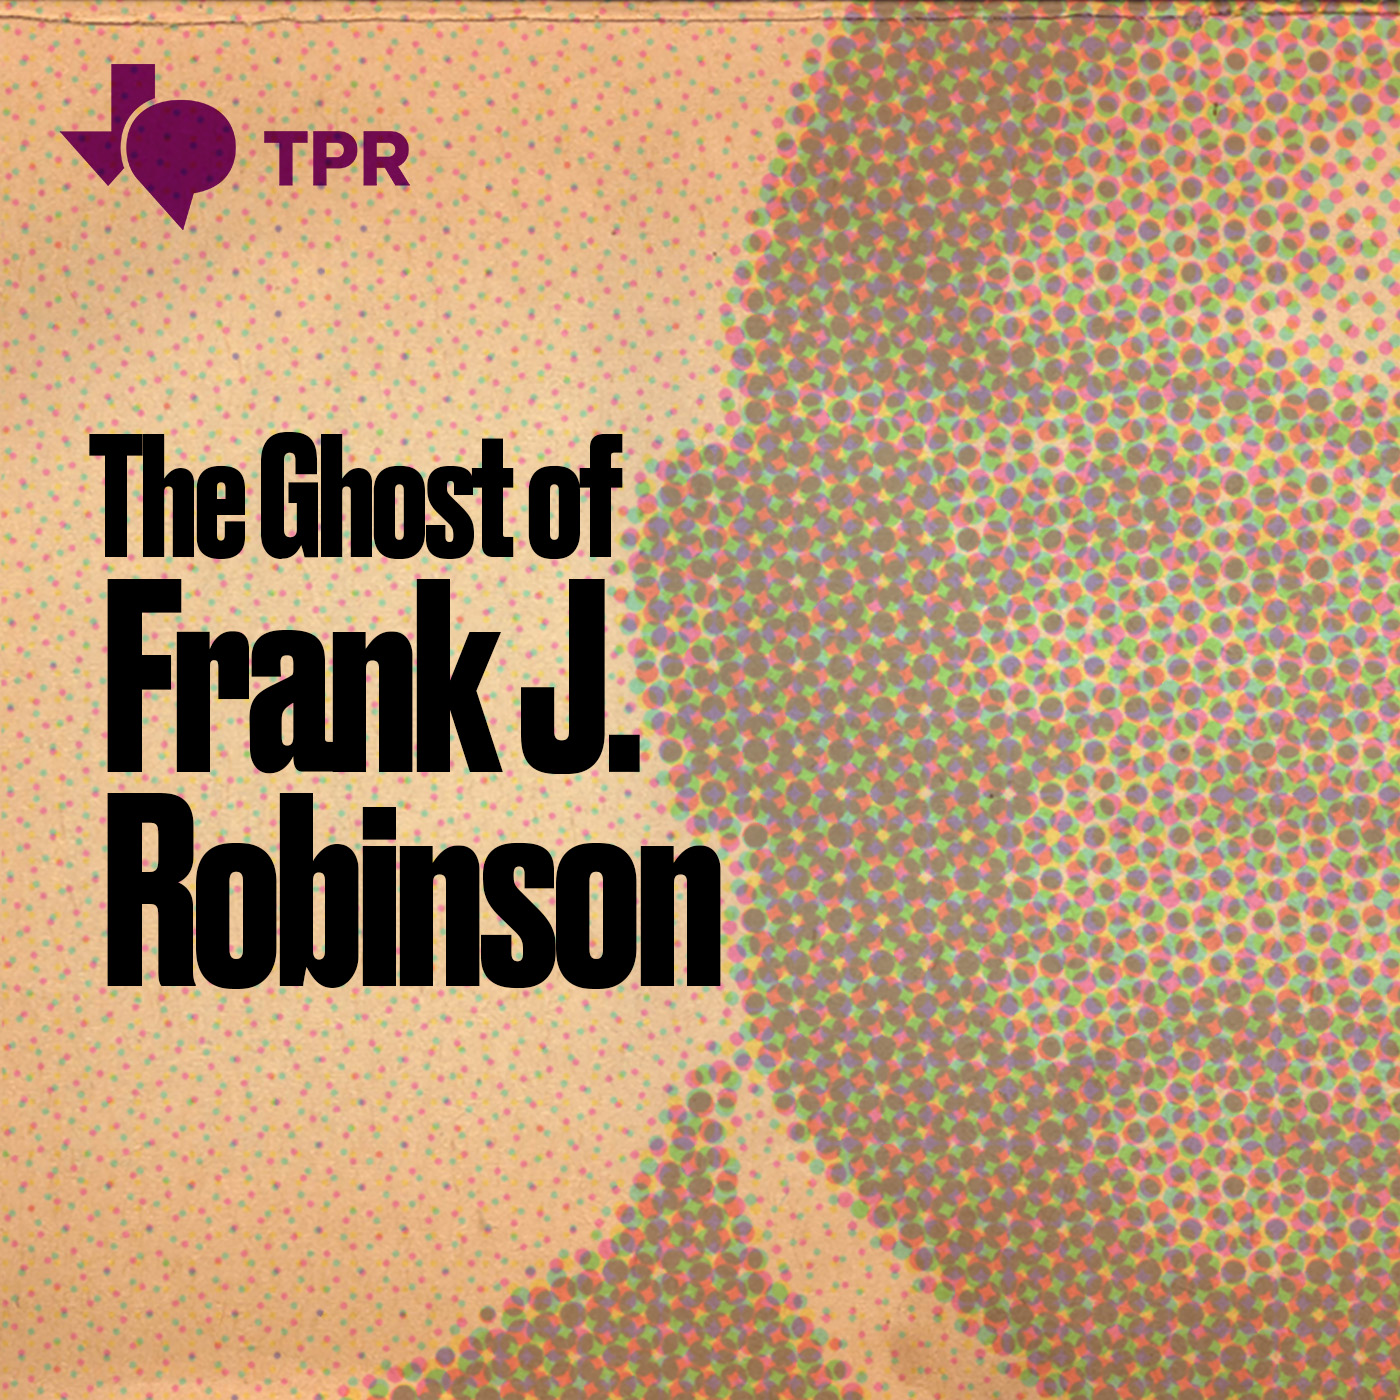 The logo of the podcast "The Ghost of Frank J. Robinson" shows a faded image of half of Frank J. Robinson's face. Robinson was an older Black man, dressed in a white button down and suit jacket, with old-fashioned glasses.